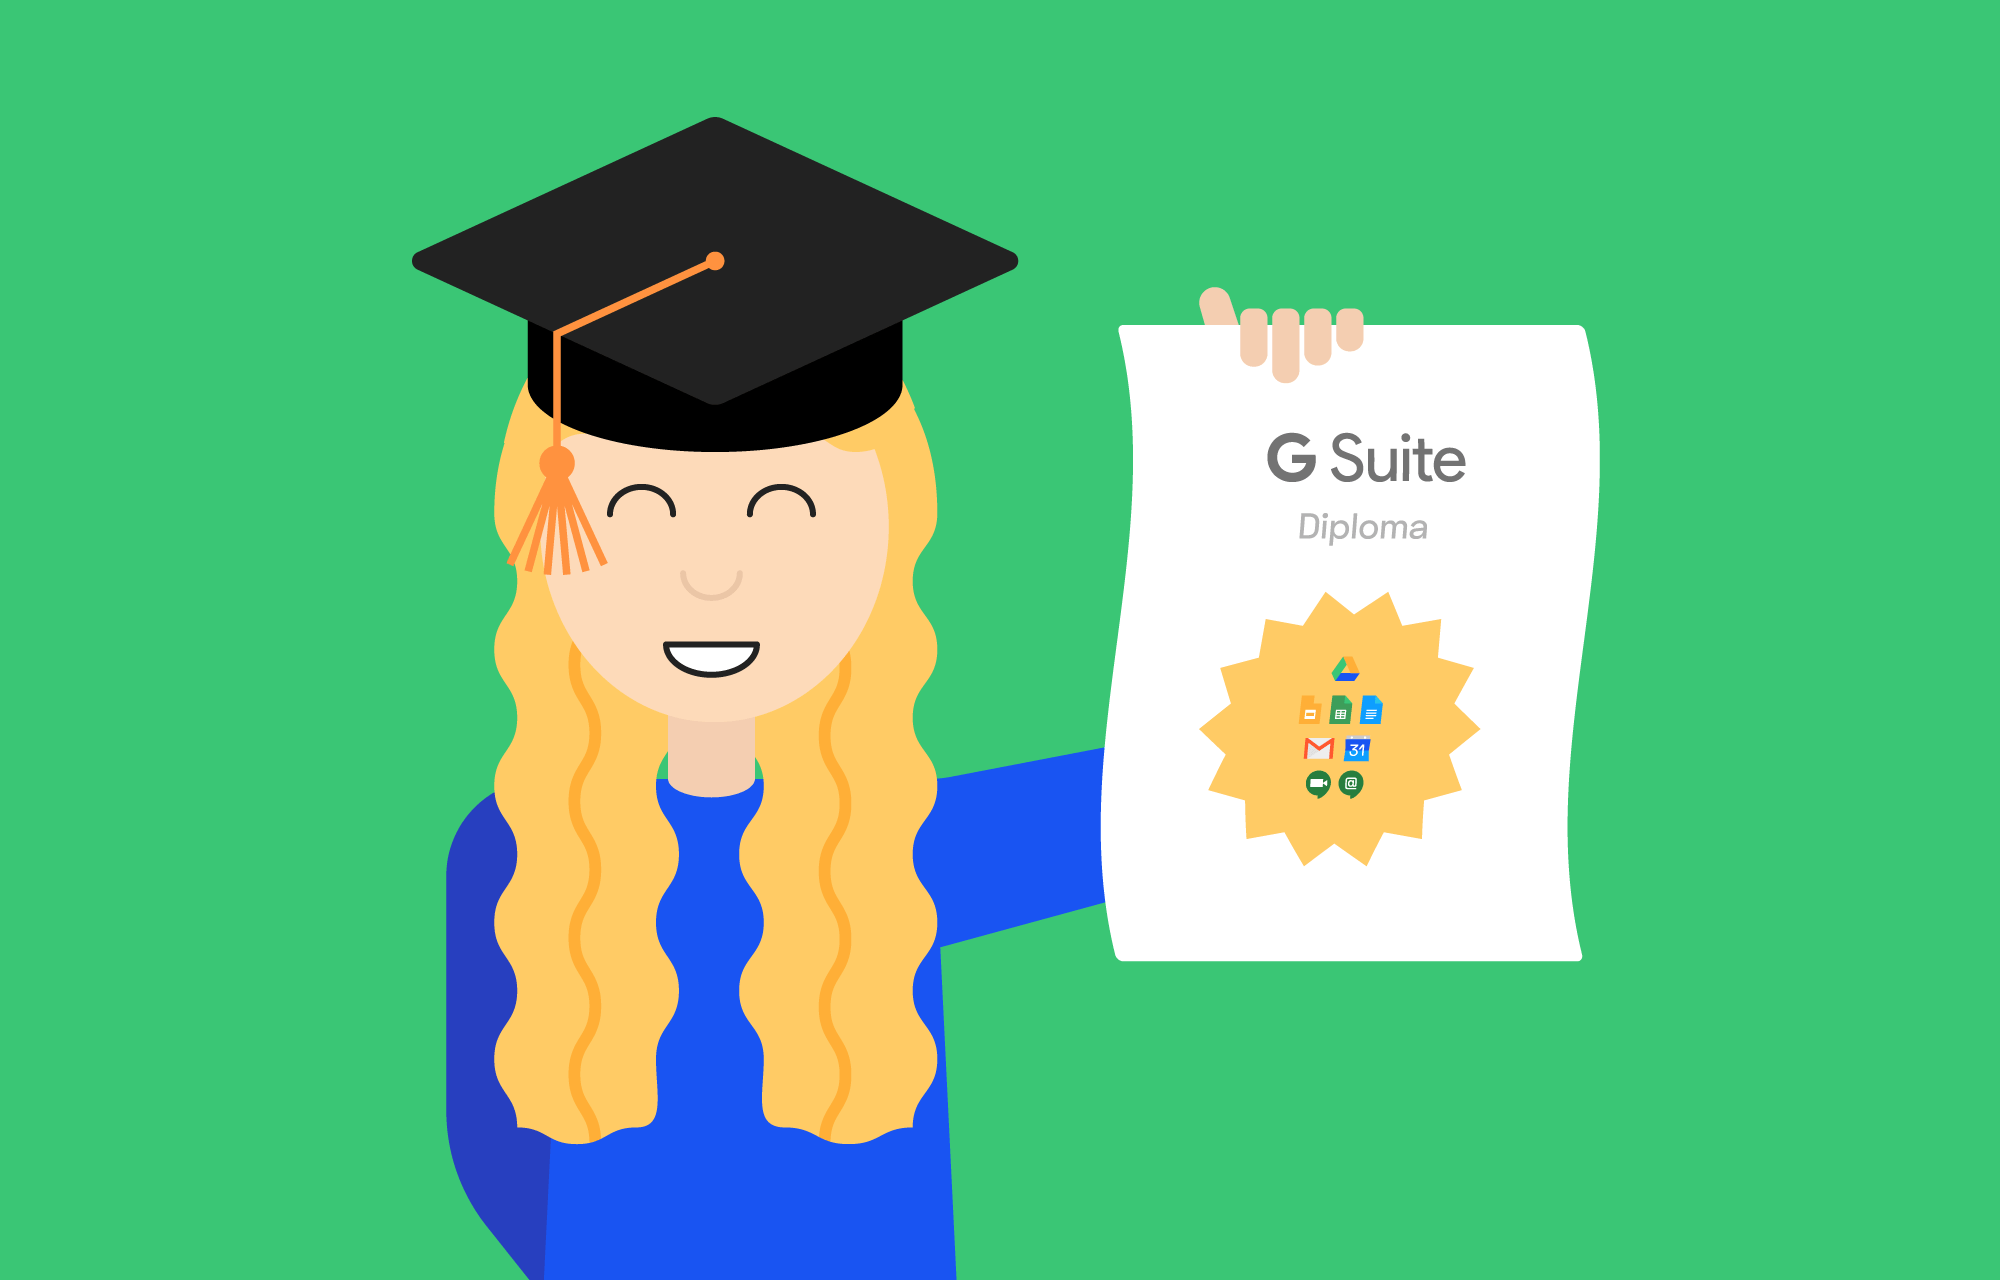 Training course in G Suite – Do I need it?